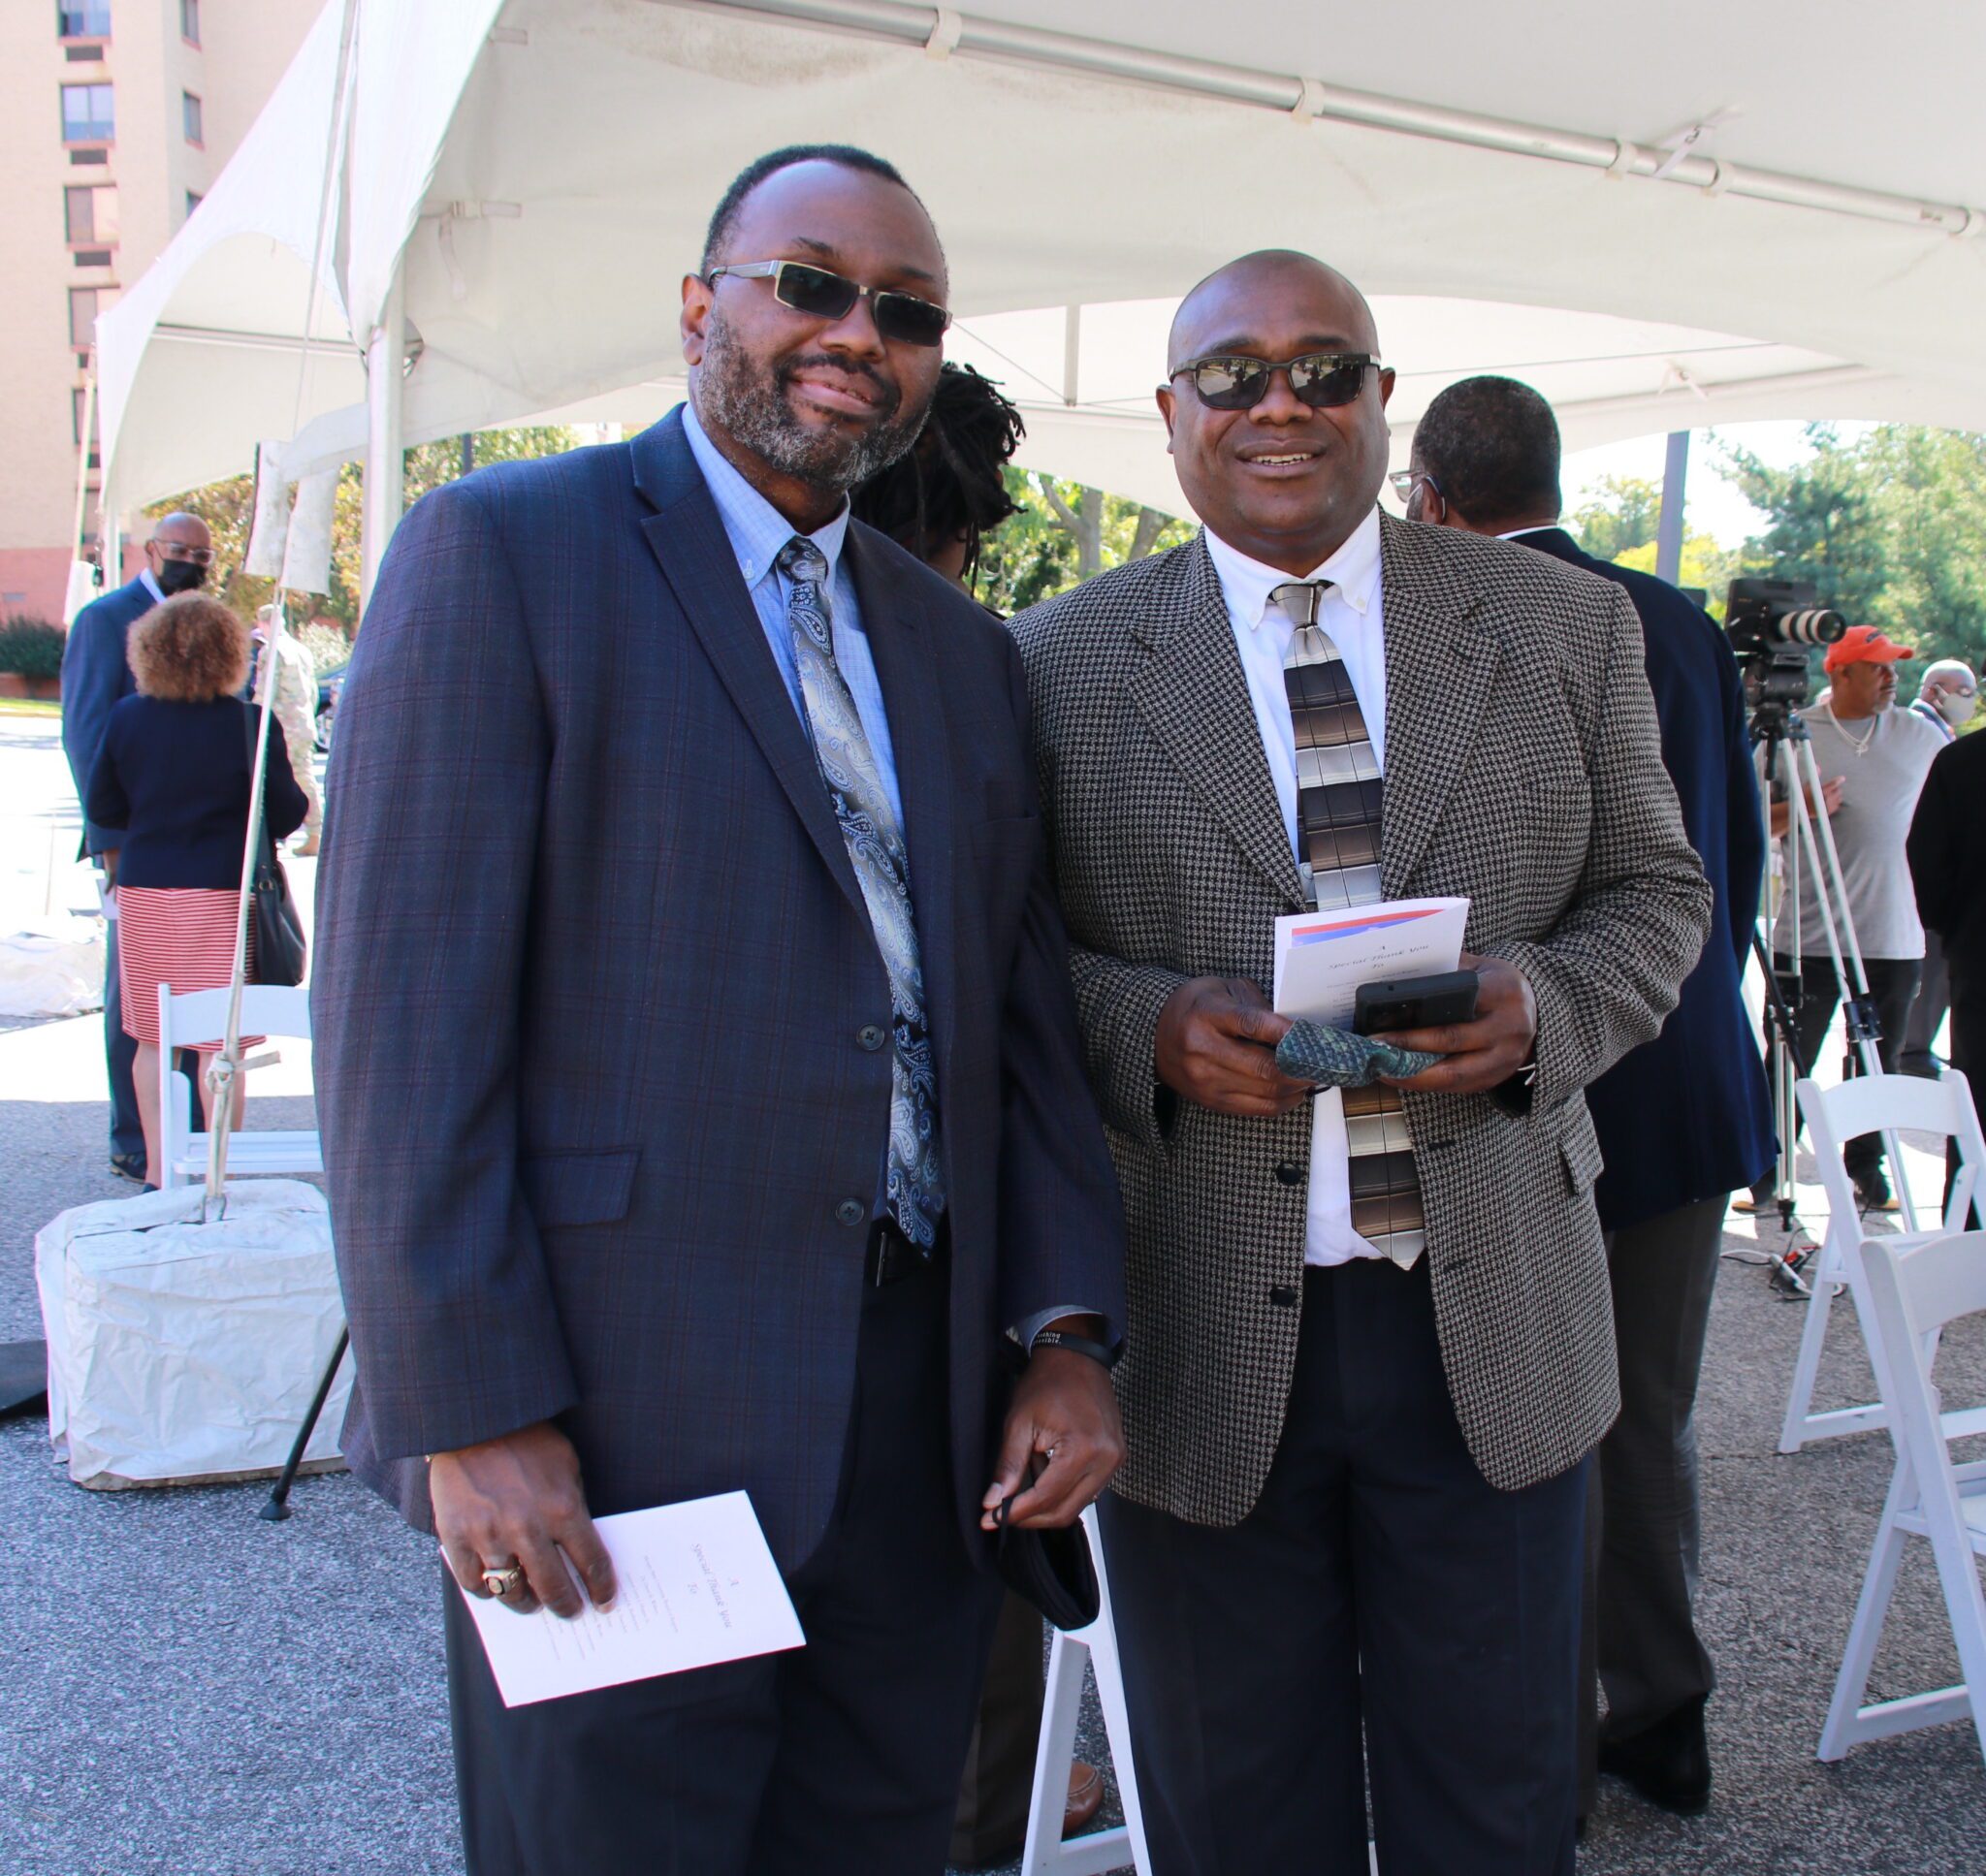 Barton Malow Vice President of Project Delivery Ben Morgan (left) and President of JLN Construction Services Mr. Namdi Iwuoha (right) at the groundbreaking ceremony for Morgan State University's Health and Human Services Center.